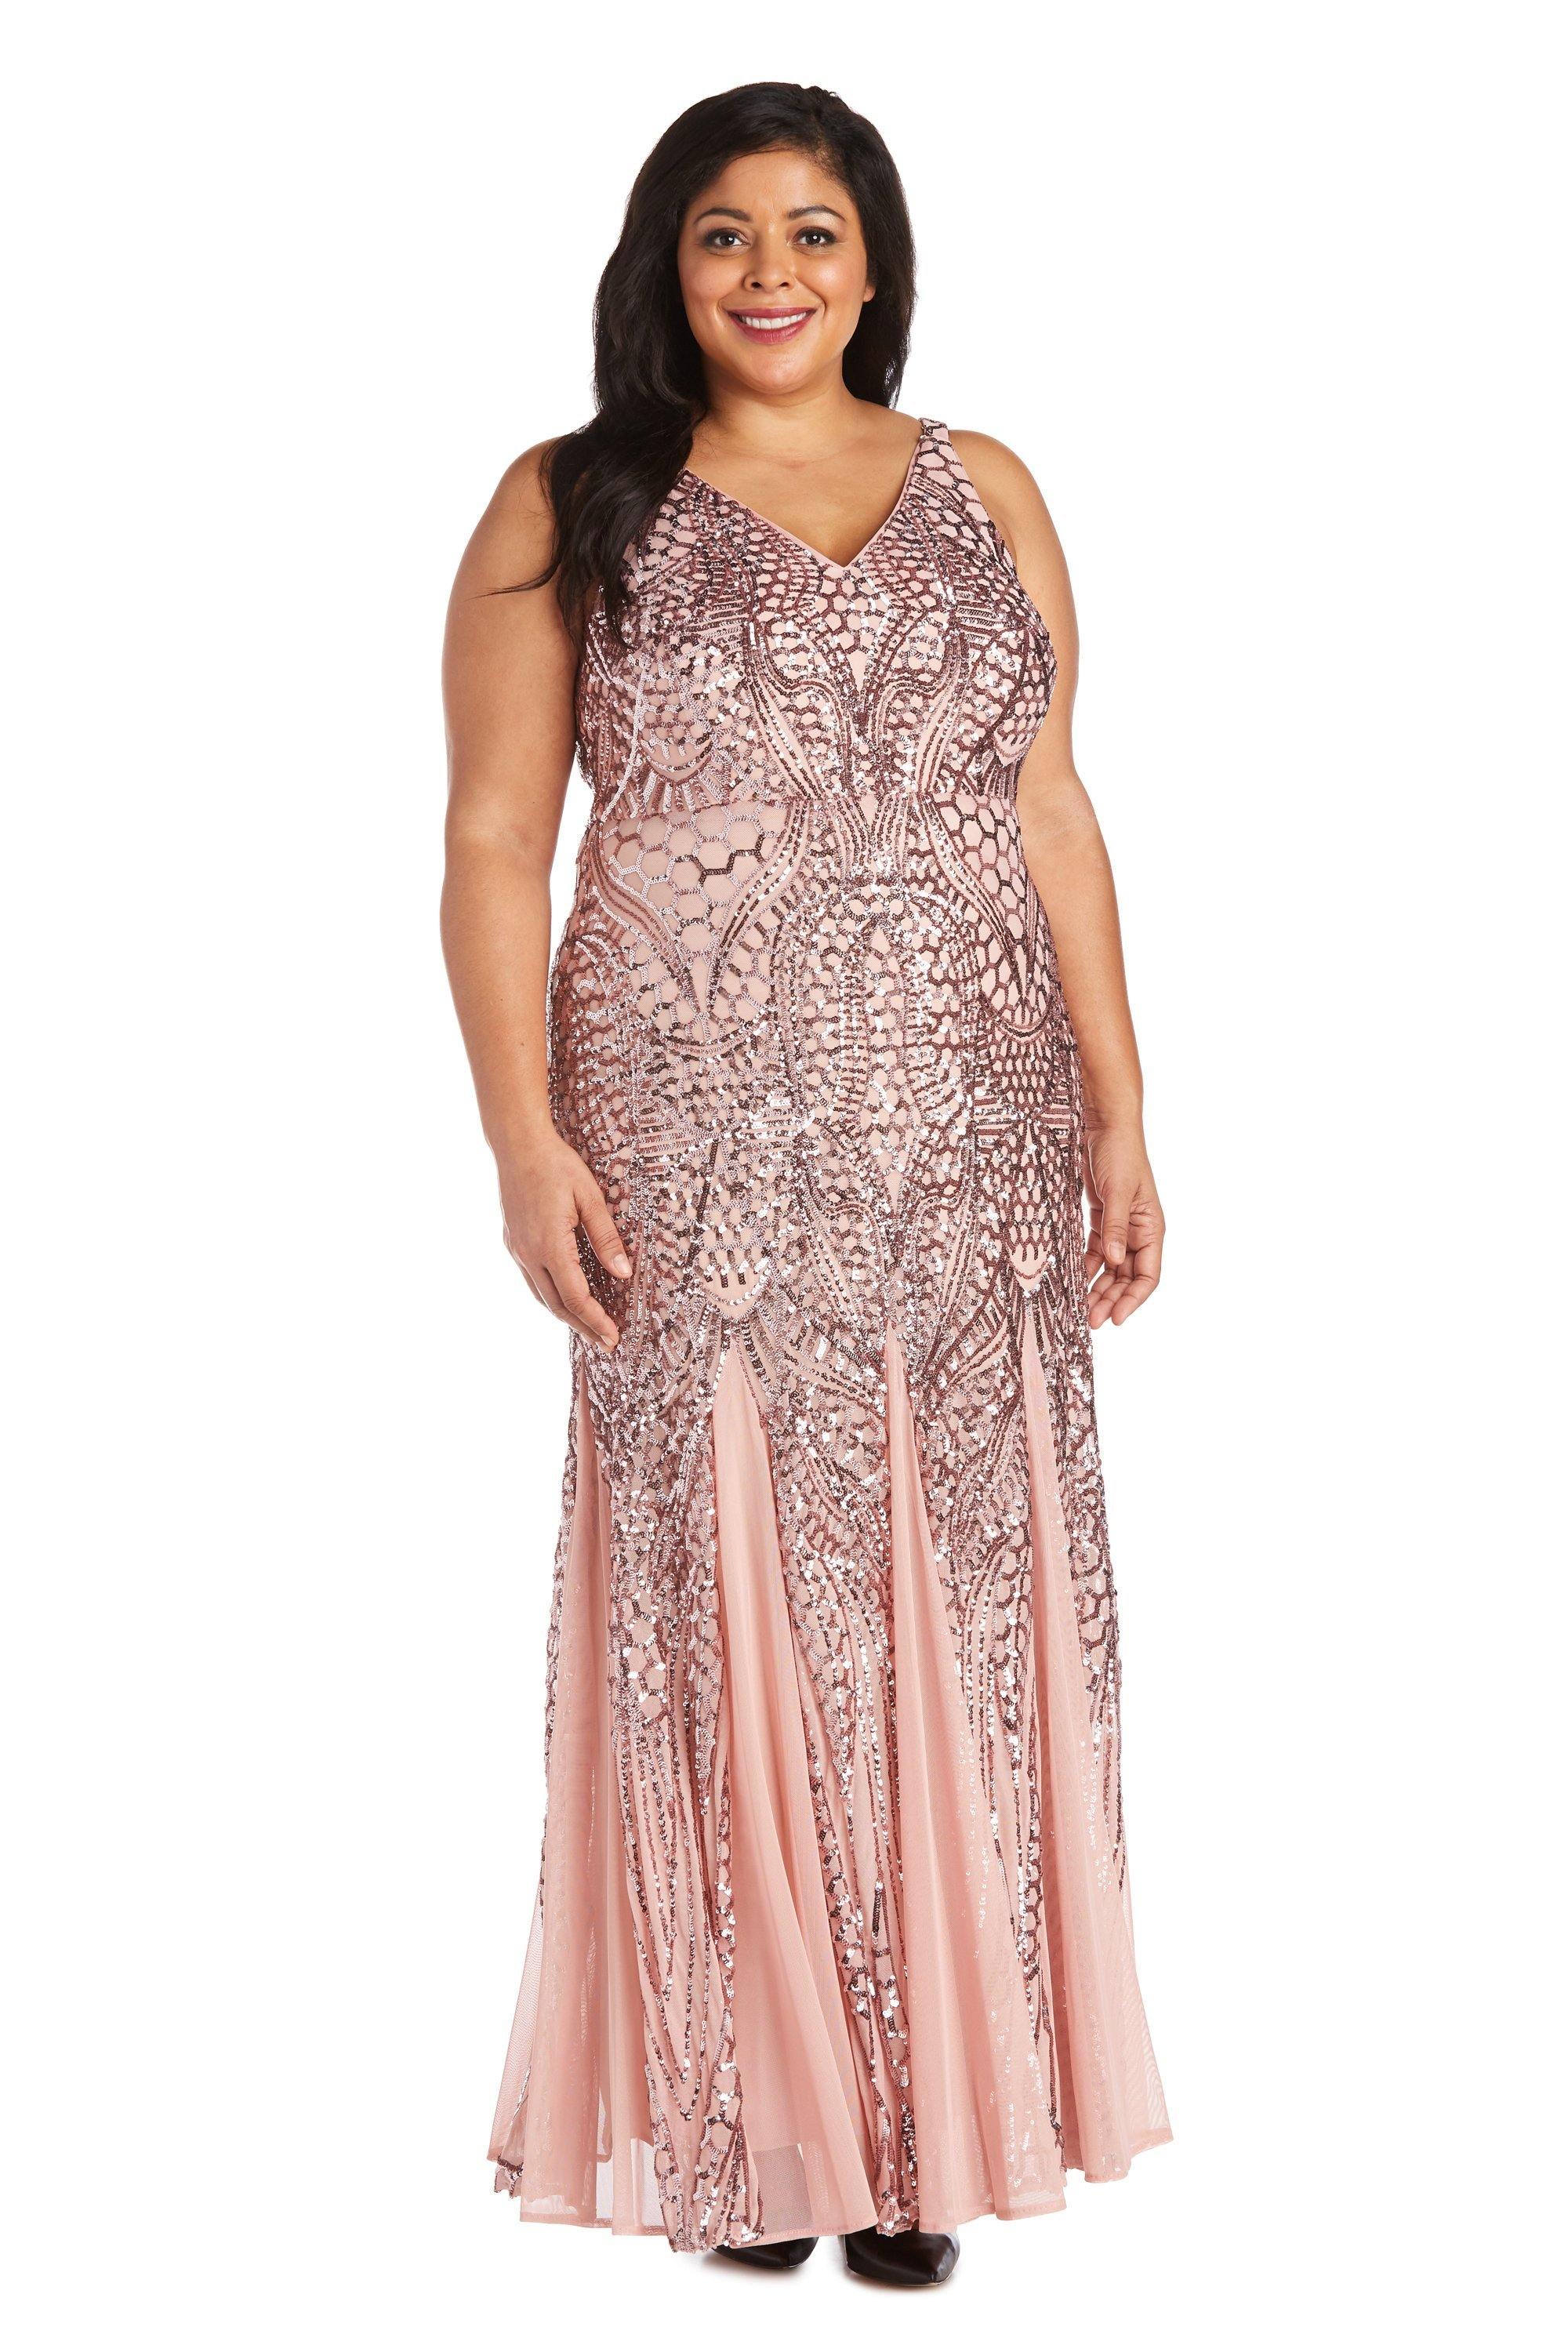 Plum Nightway Long Plus Size Beaded Formal Gown 21685W for $114.99